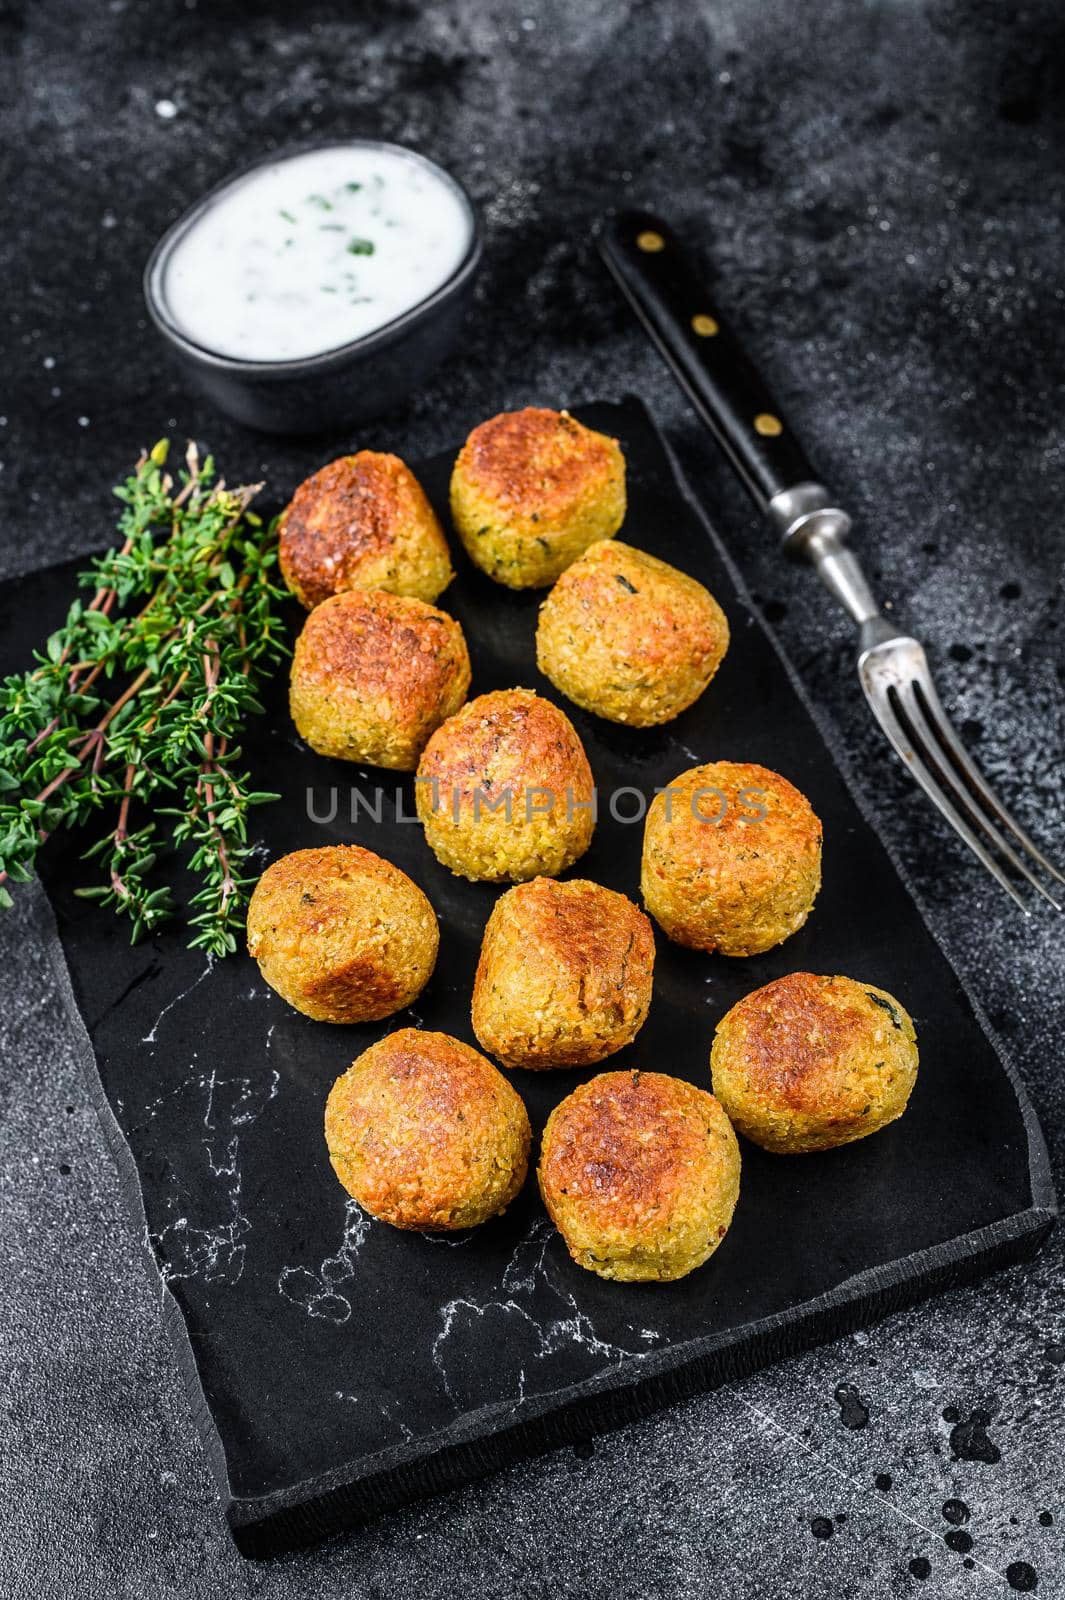 Roasted vegetarian falafel balls from spiced chickpeas with garlic yogurt sauce. Black background. Top view by Composter